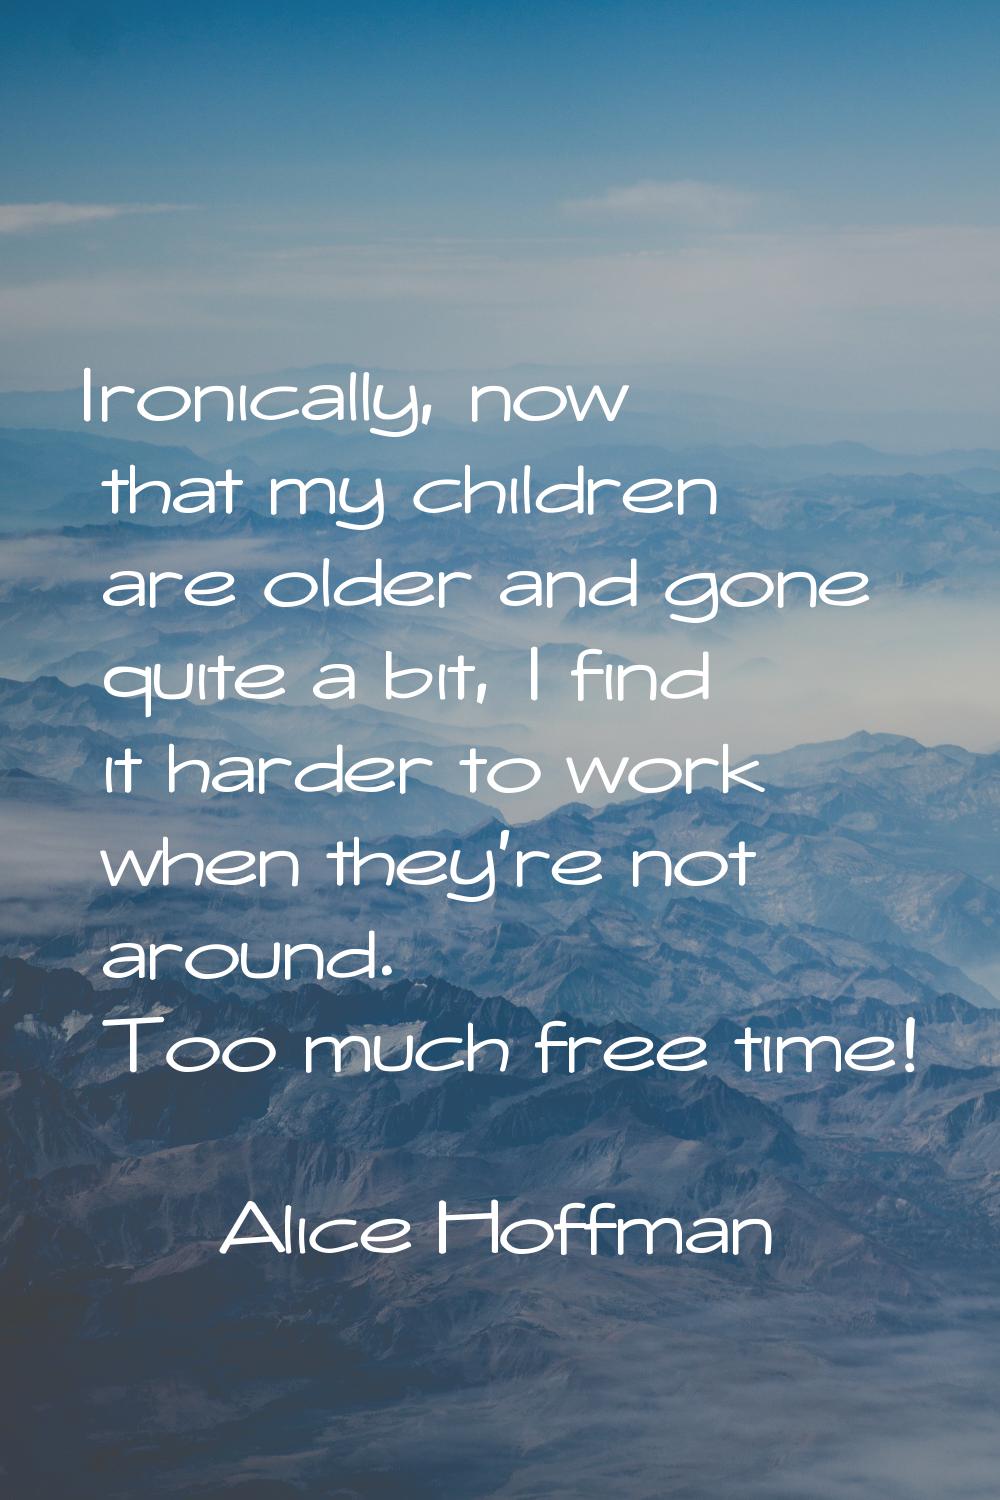 Ironically, now that my children are older and gone quite a bit, I find it harder to work when they